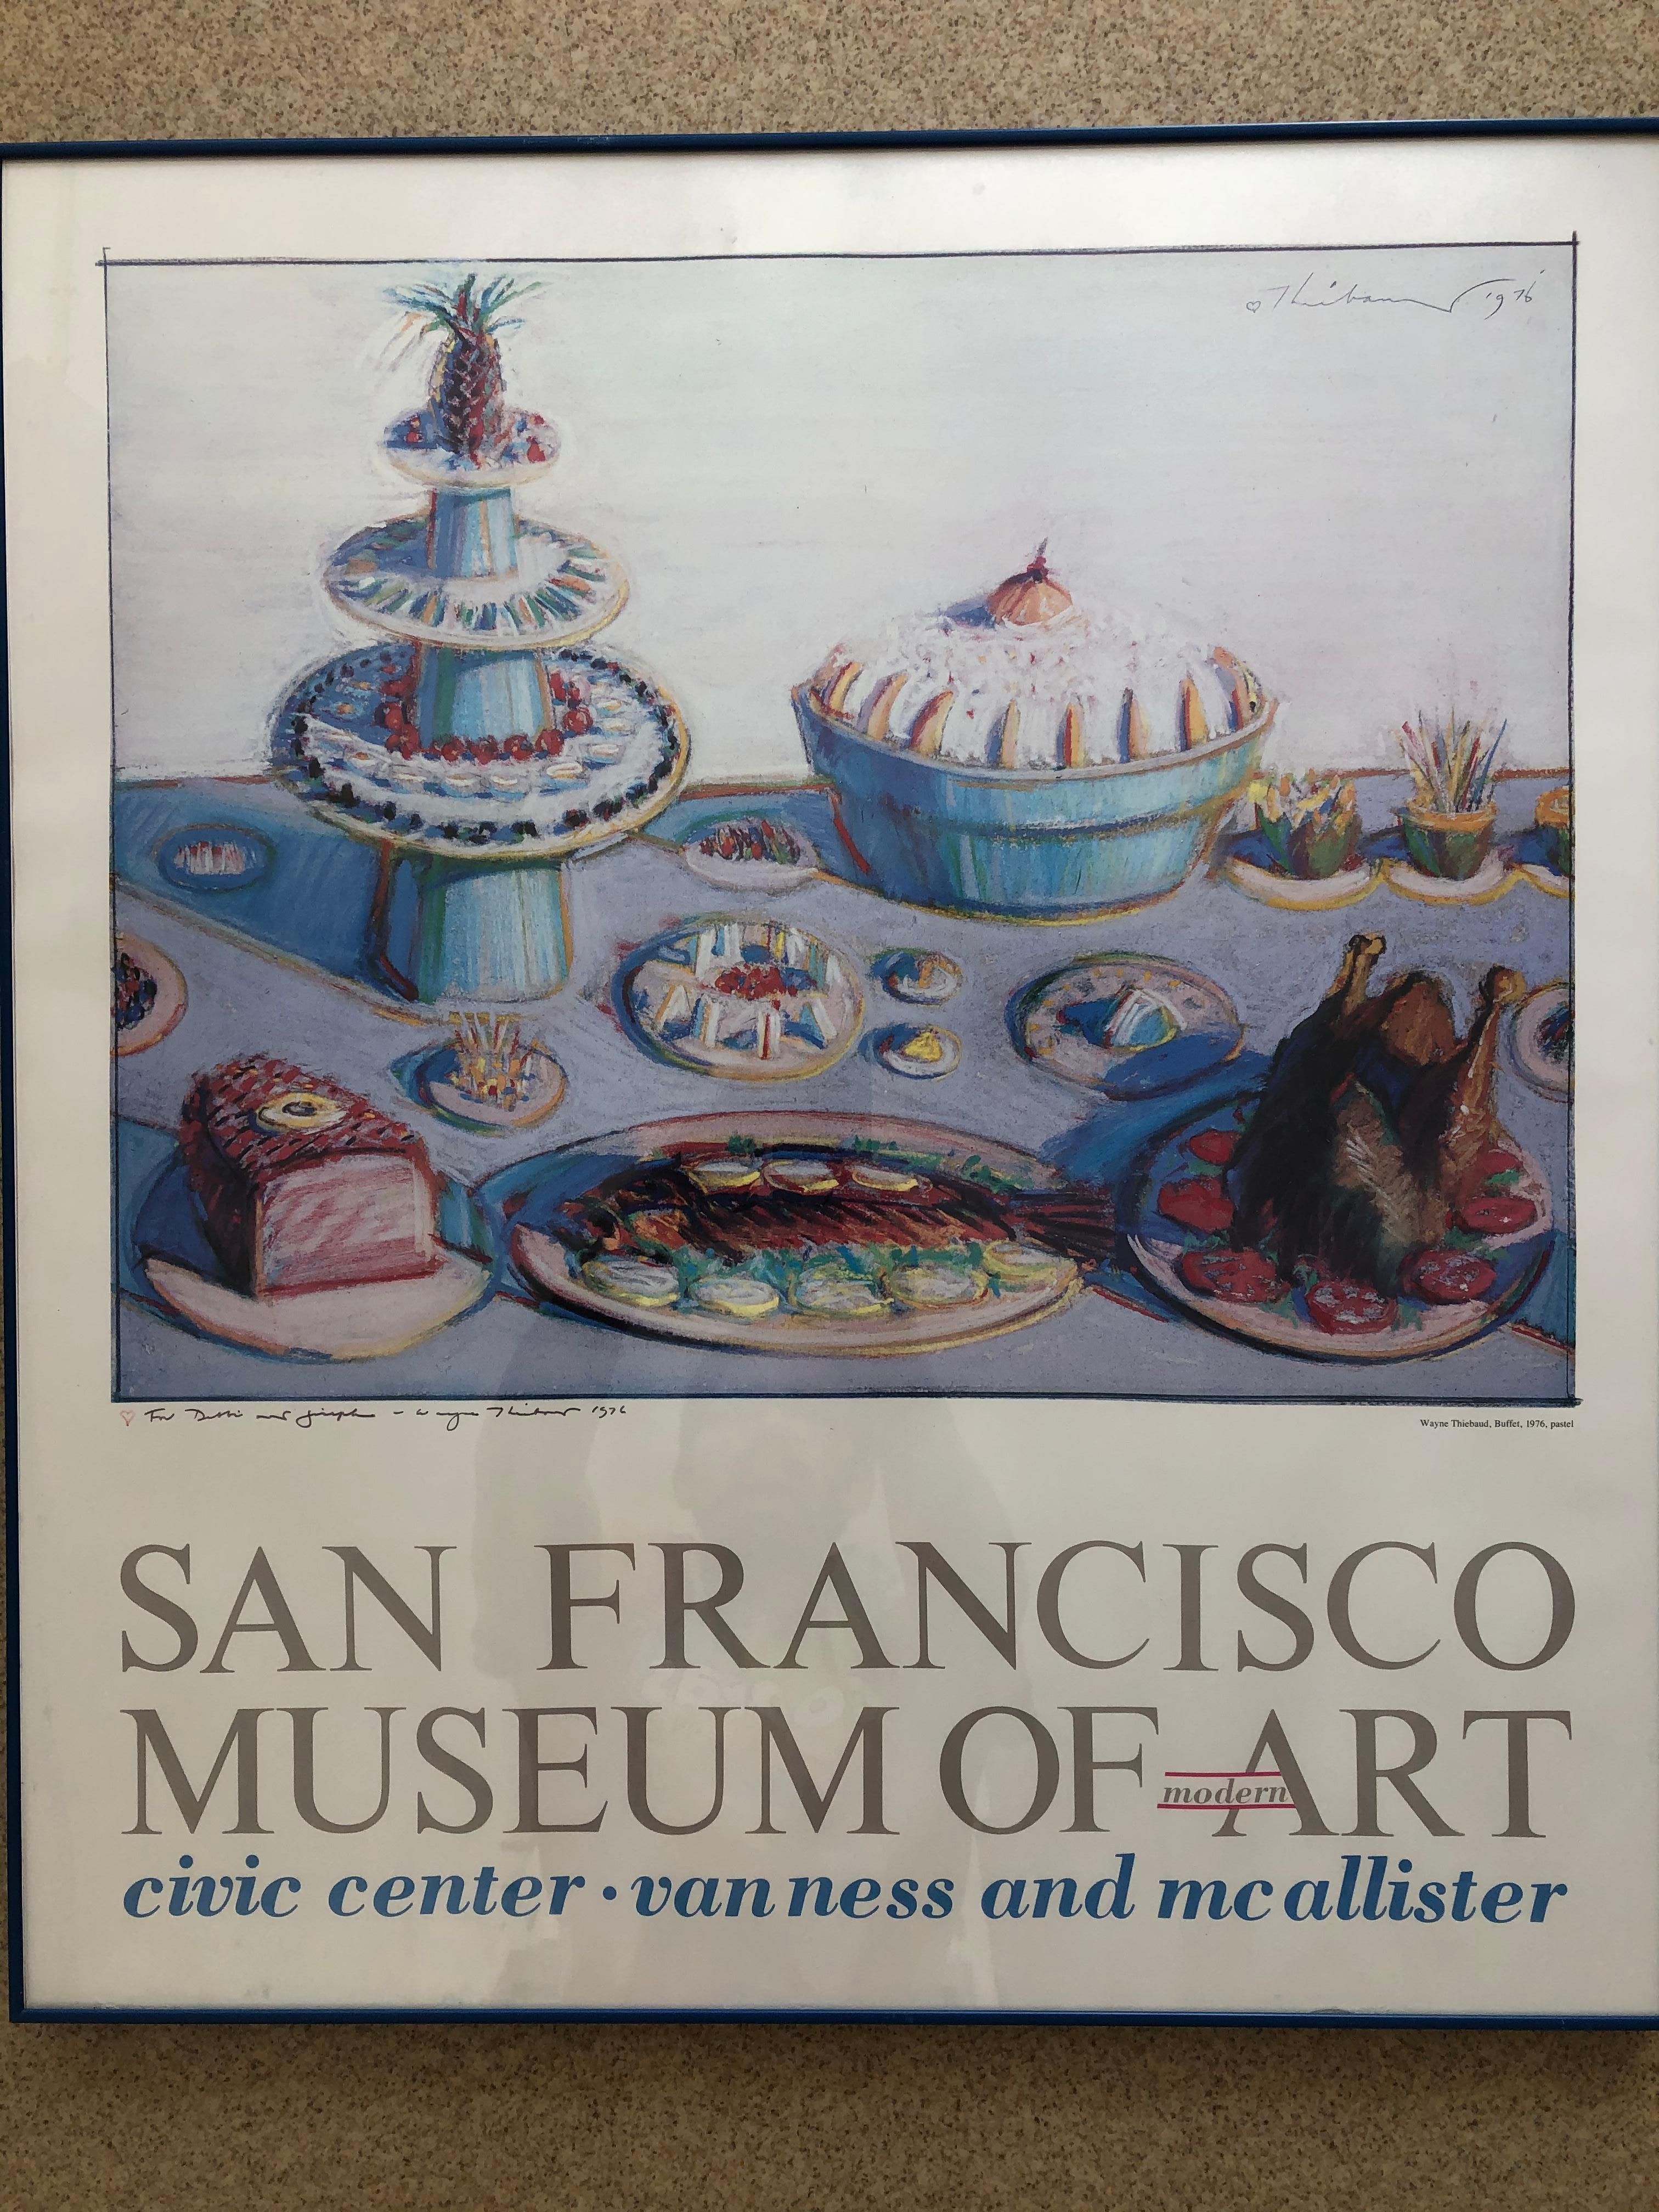 Wayne Thiebaud: 1920-2021. Well listed California artist with auction results over 16 million dollars for paintings. He has had results for prints in the hundreds of thousands of dollars. This exhibition poster was signed by him and dedicated. It